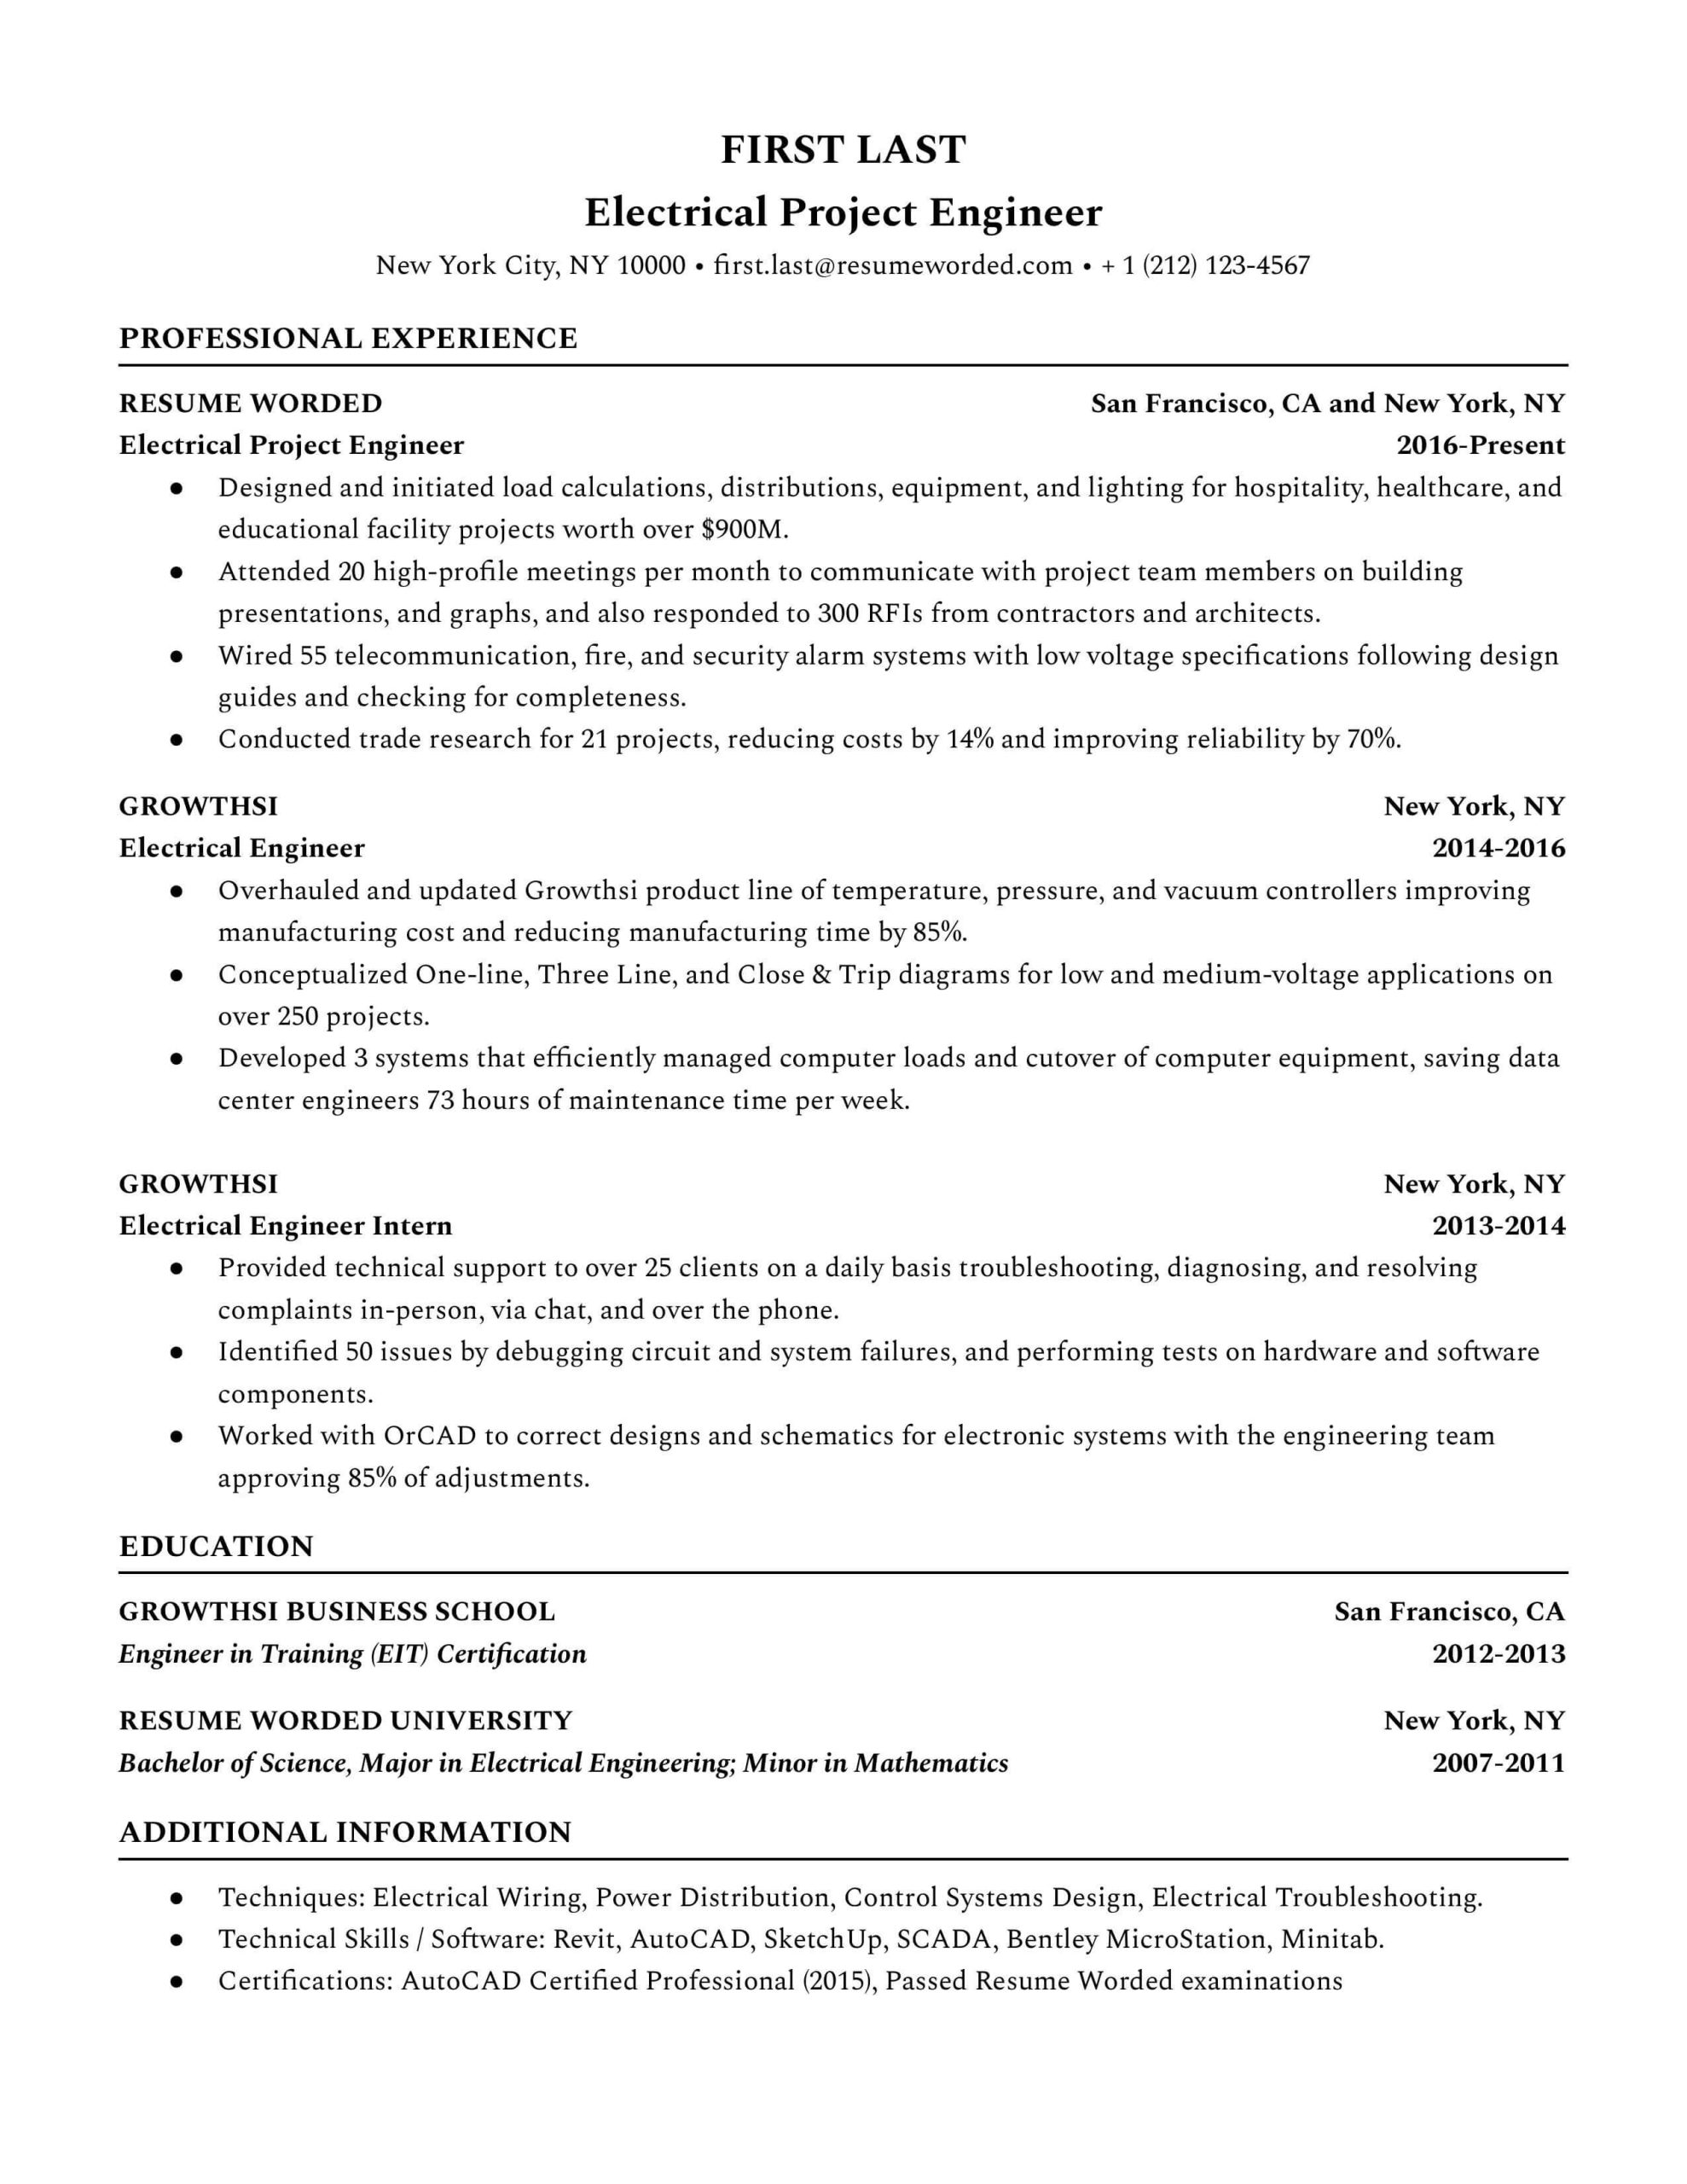 Sample Resume for Entry Level Project Management Entry Level Project Manager Resume Example for 2022 Resume Worded